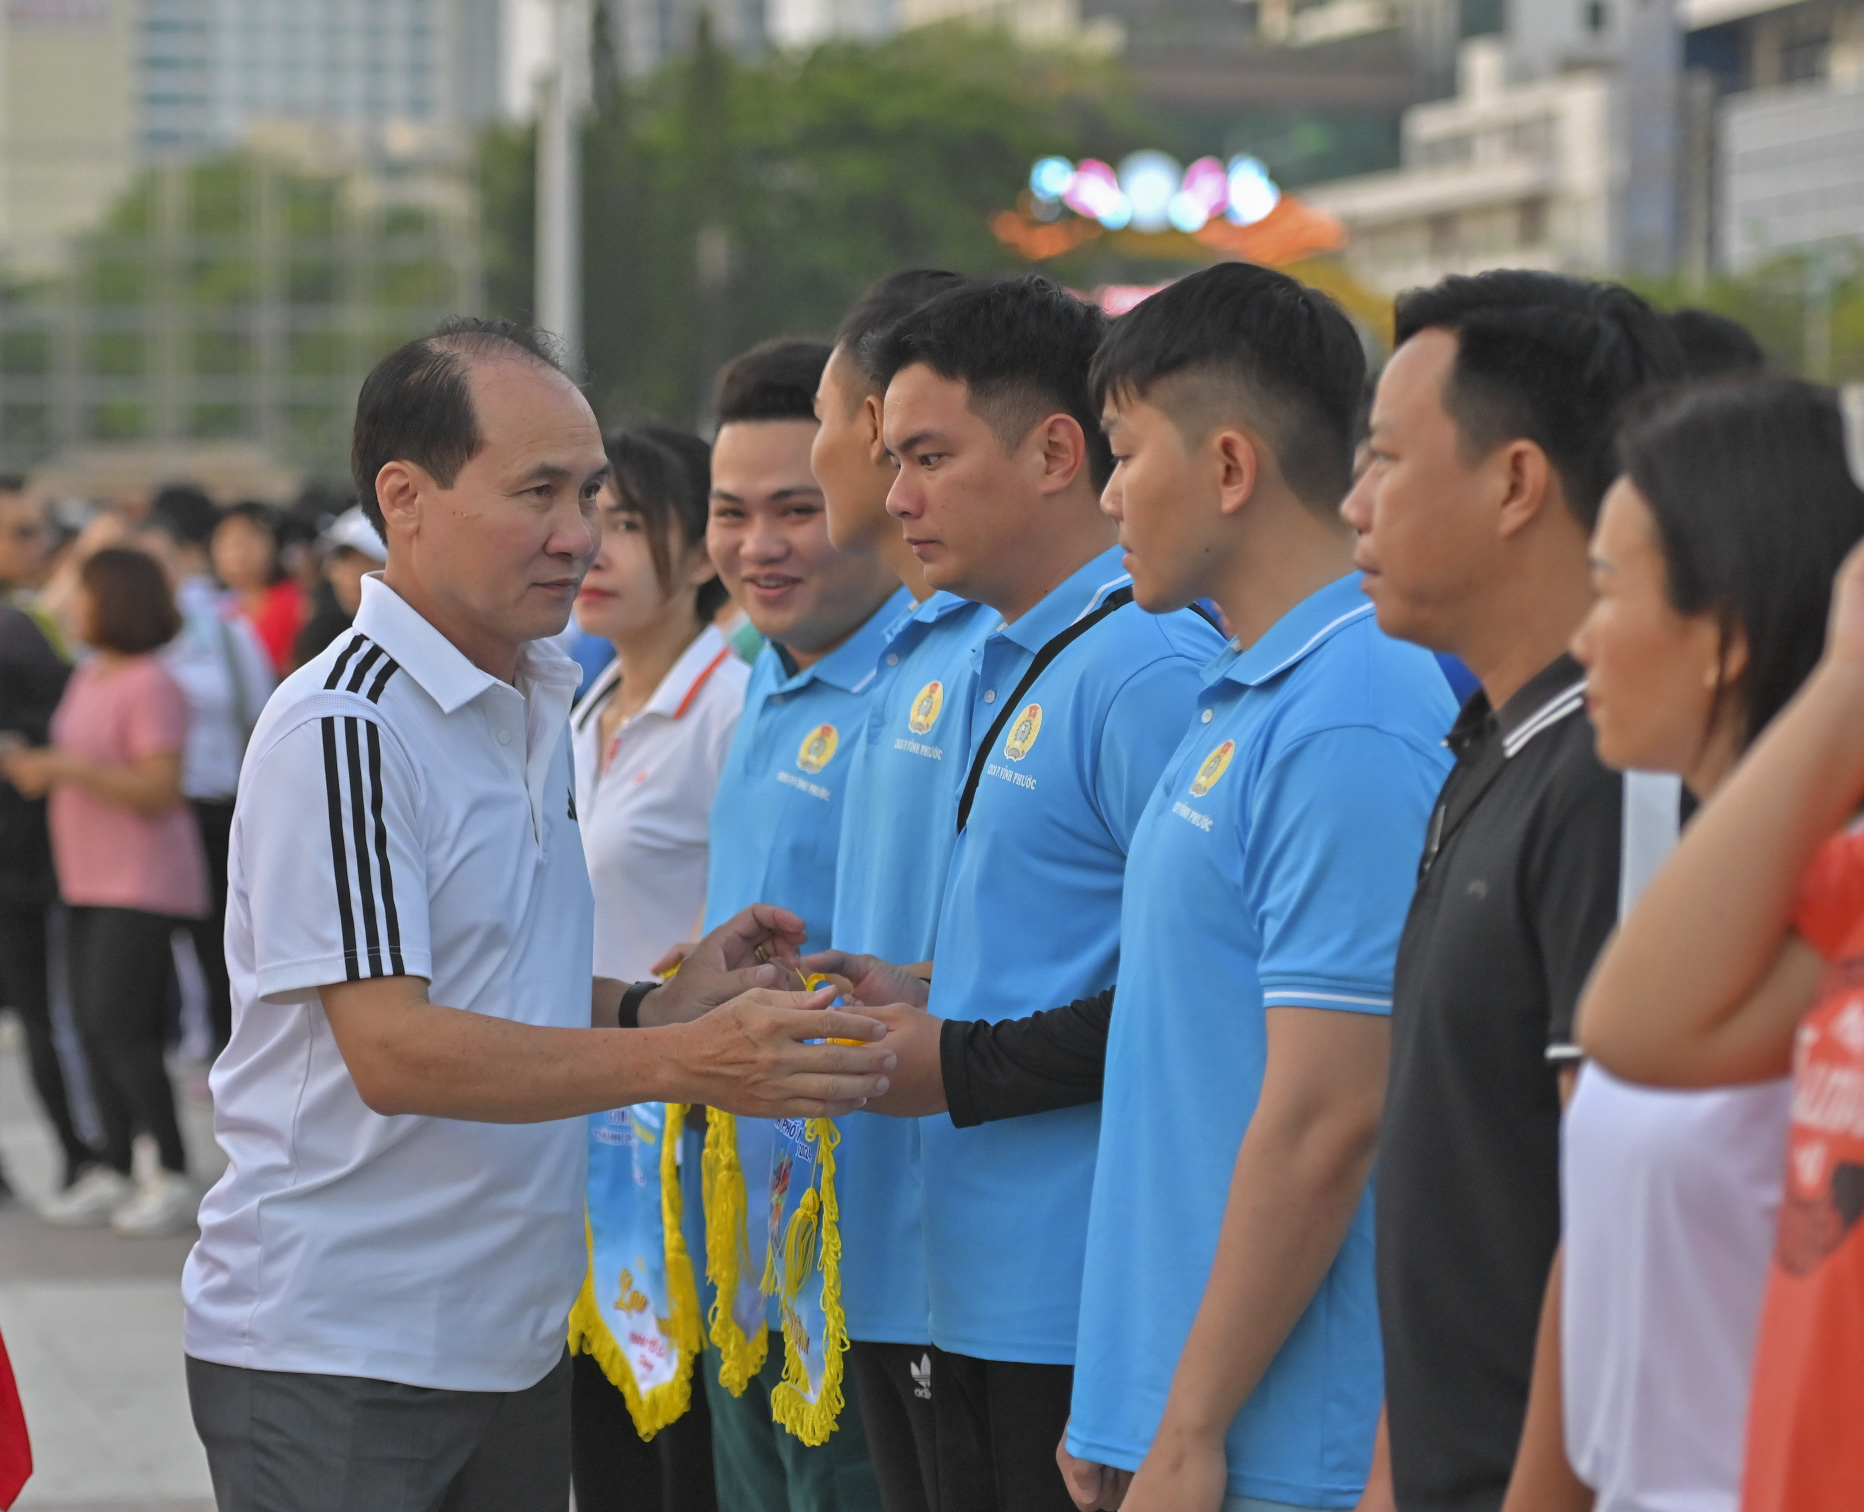 Nguyen Tuan Thanh - Deputy Director of the Provincial Department of Culture and Sports, giving souvenir flags to the participating units

